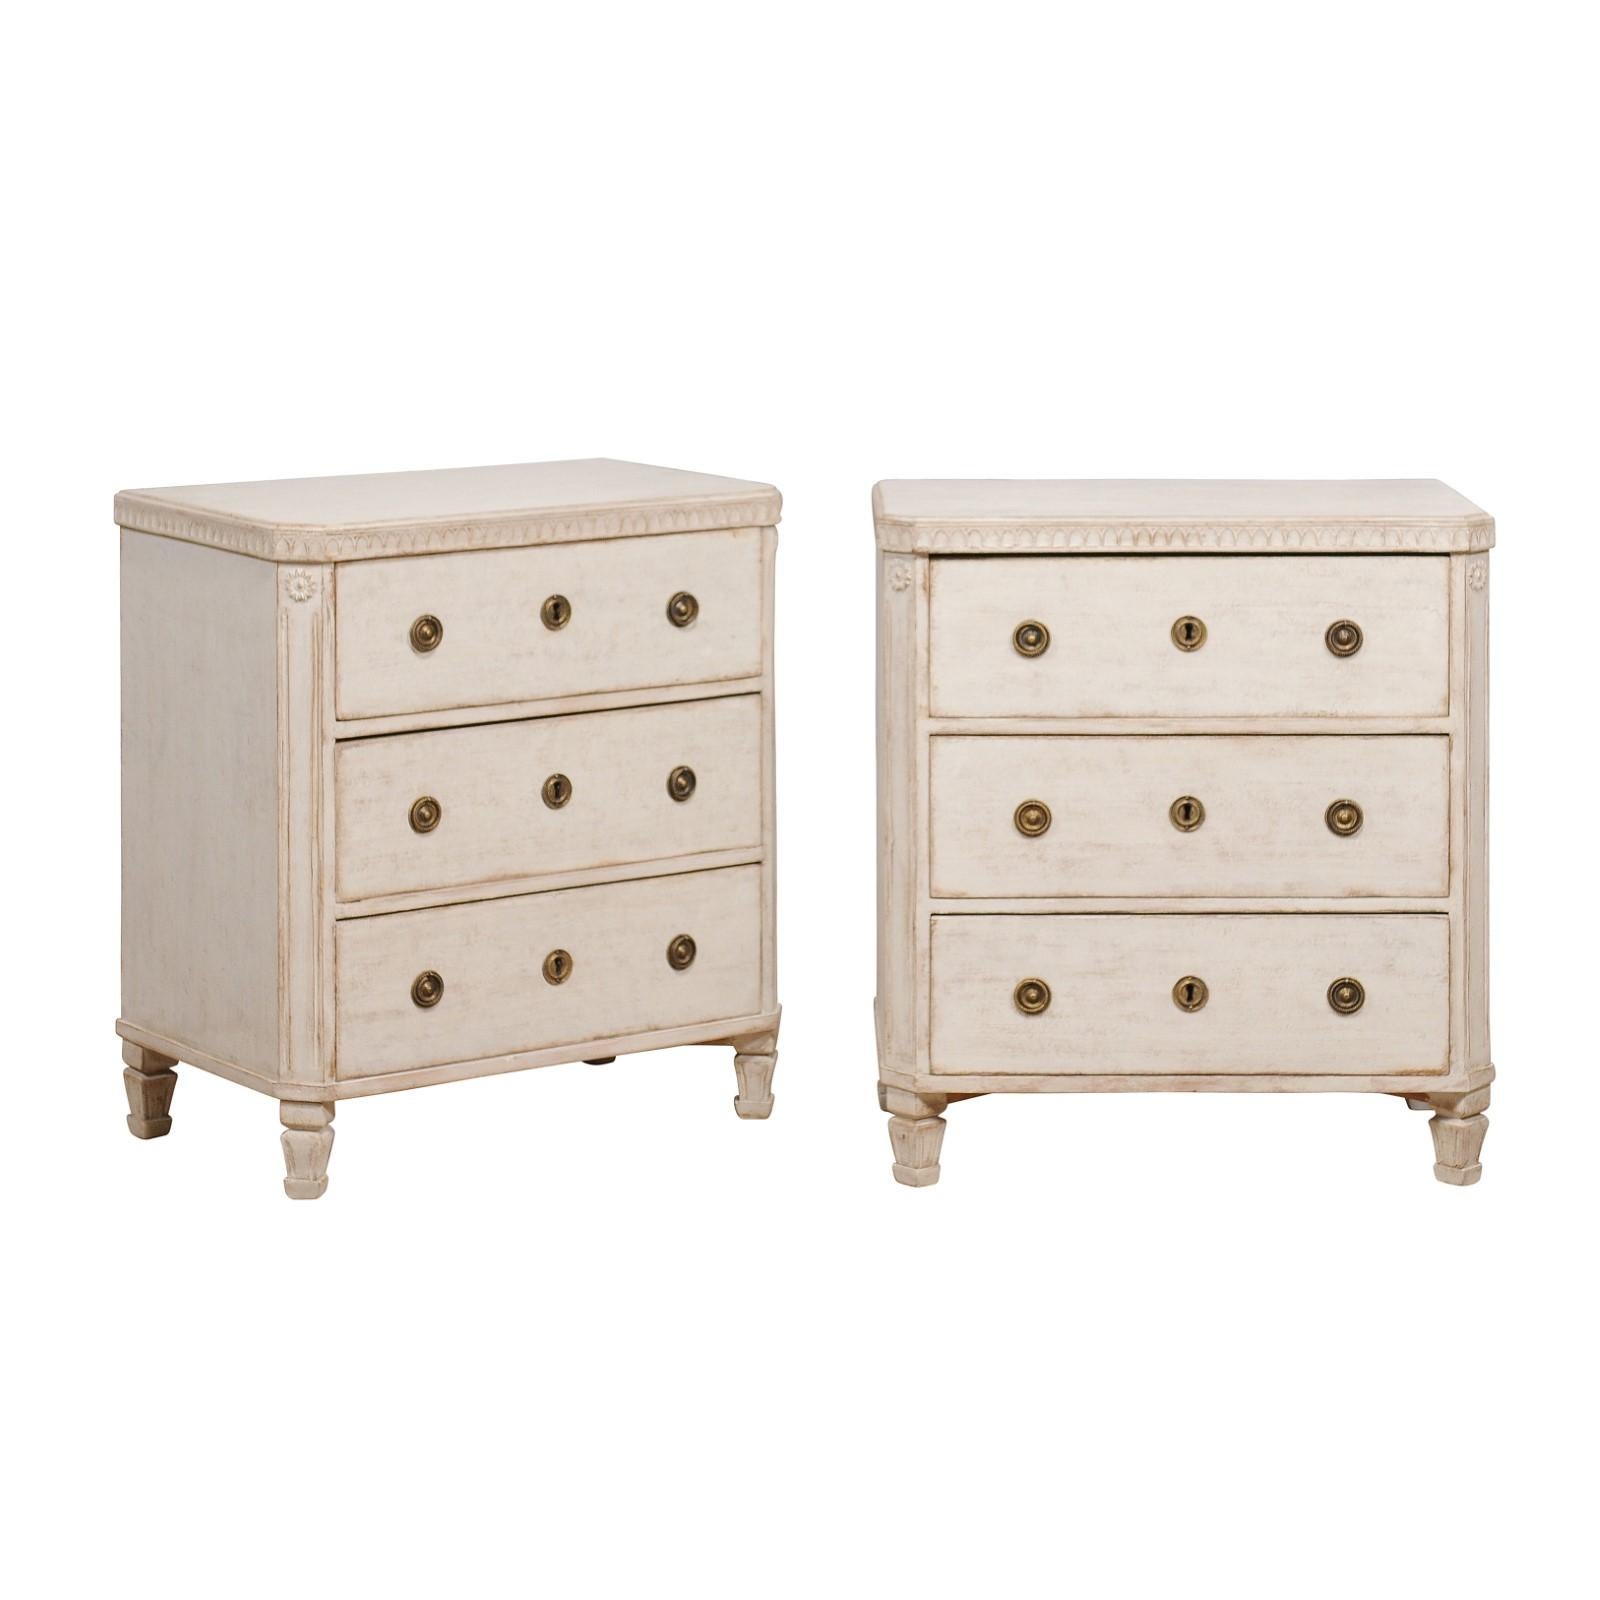 A pair of Swedish Gustavian style chests from circa 1880 with light gray / cream painted finish, three drawers each, carved friezes and tapered feet. A symphony of Swedish elegance, this pair of Gustavian style chests, dating from circa 1880, stands